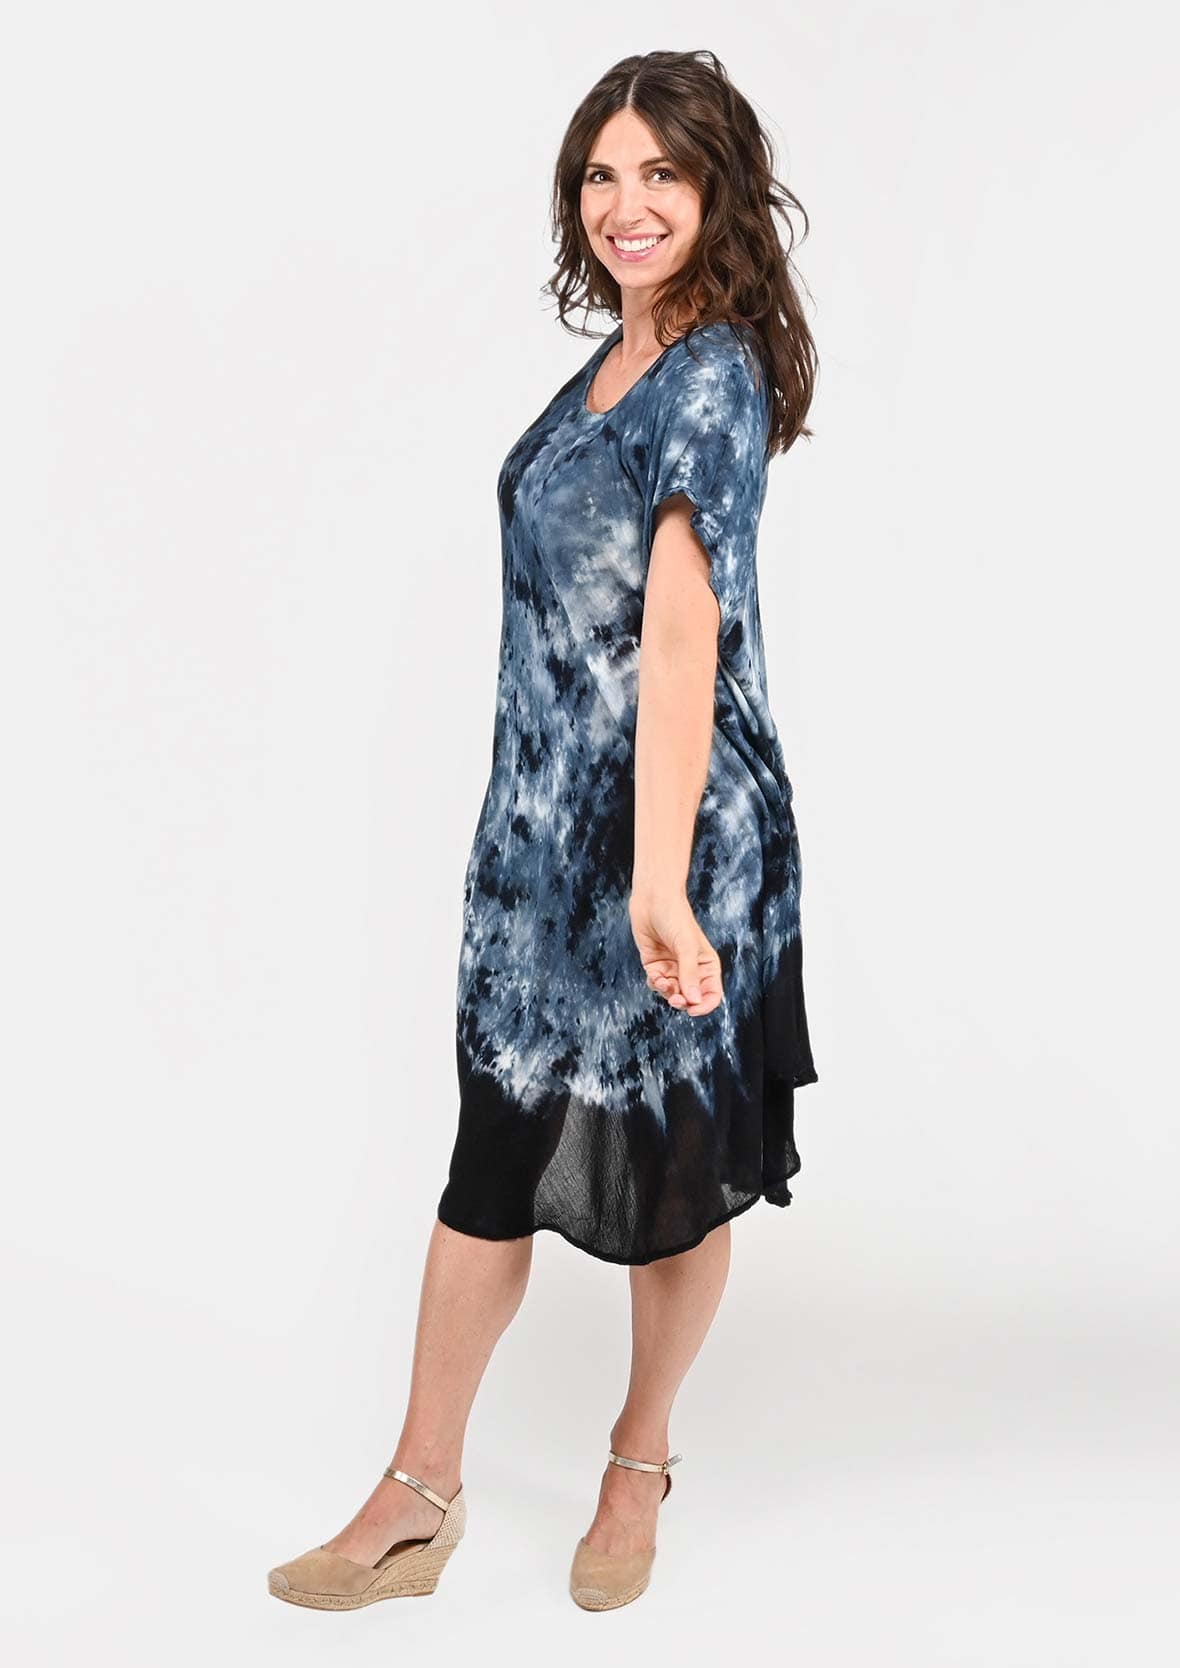 marble tie-dye gray black umbrella dress with sleeves #color_Slate Gray Black Marble